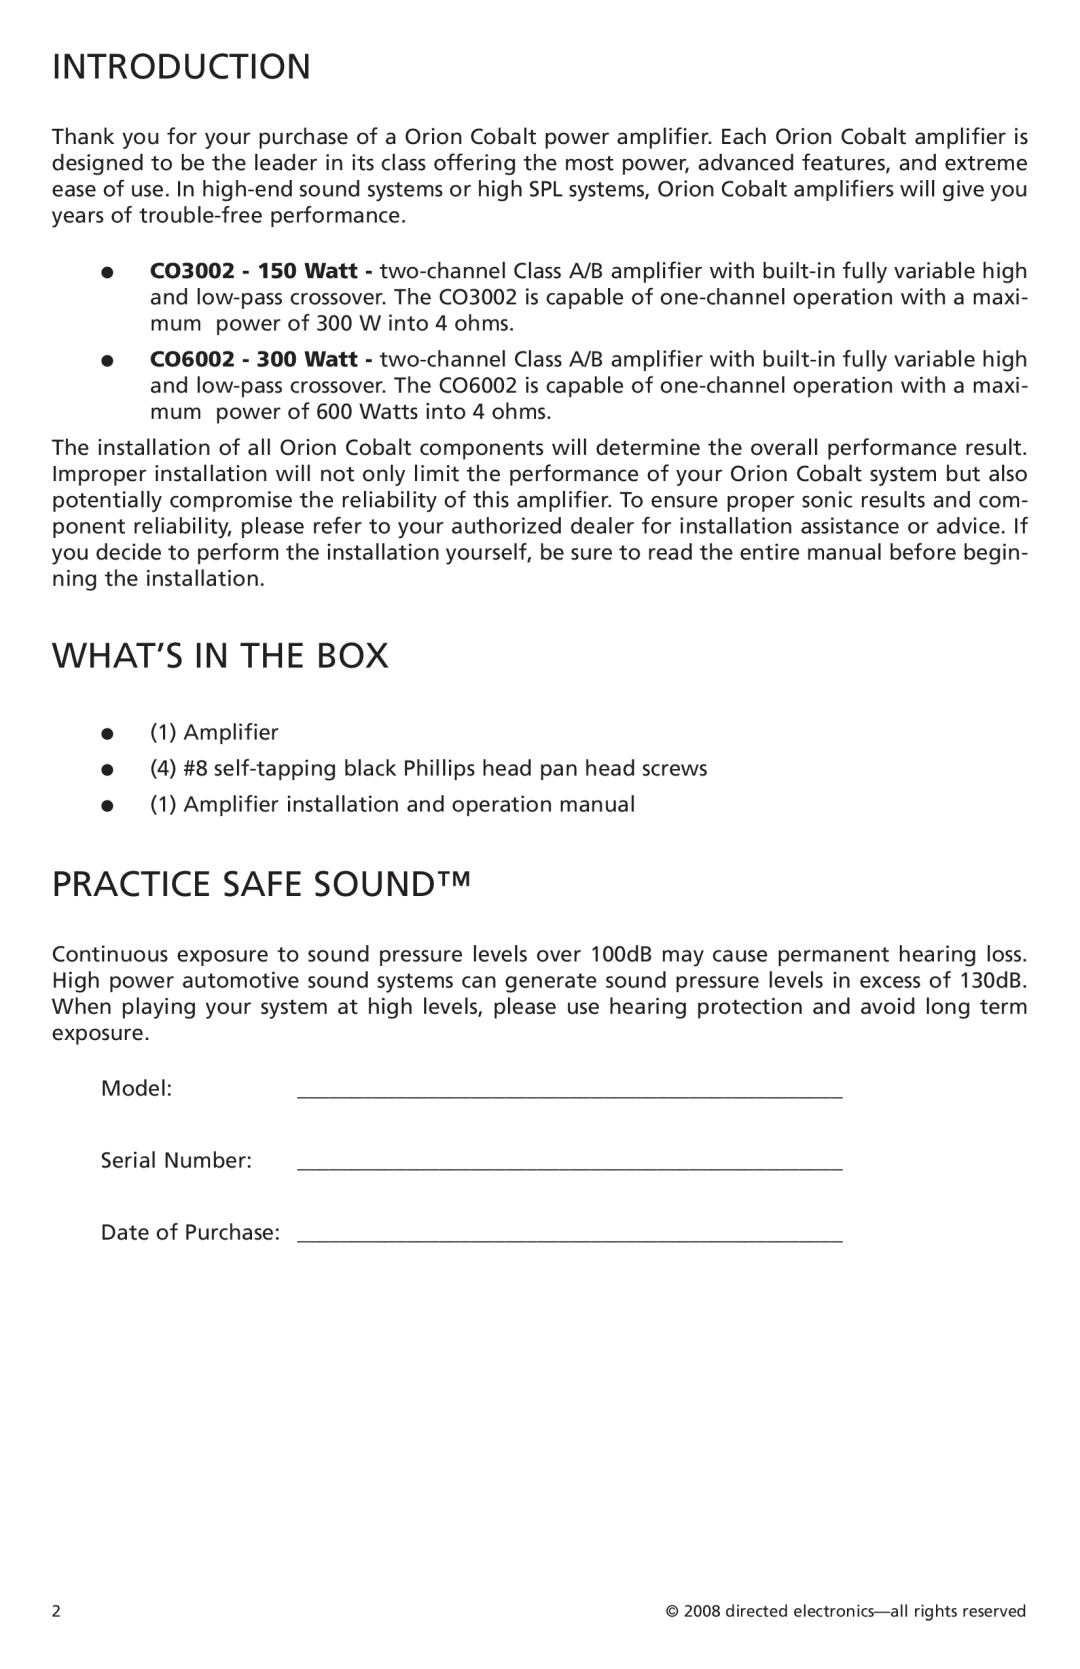 Orion Car Audio CO3002, CO6002 owner manual Introduction, What’S In The Box, Practice Safe Sound 